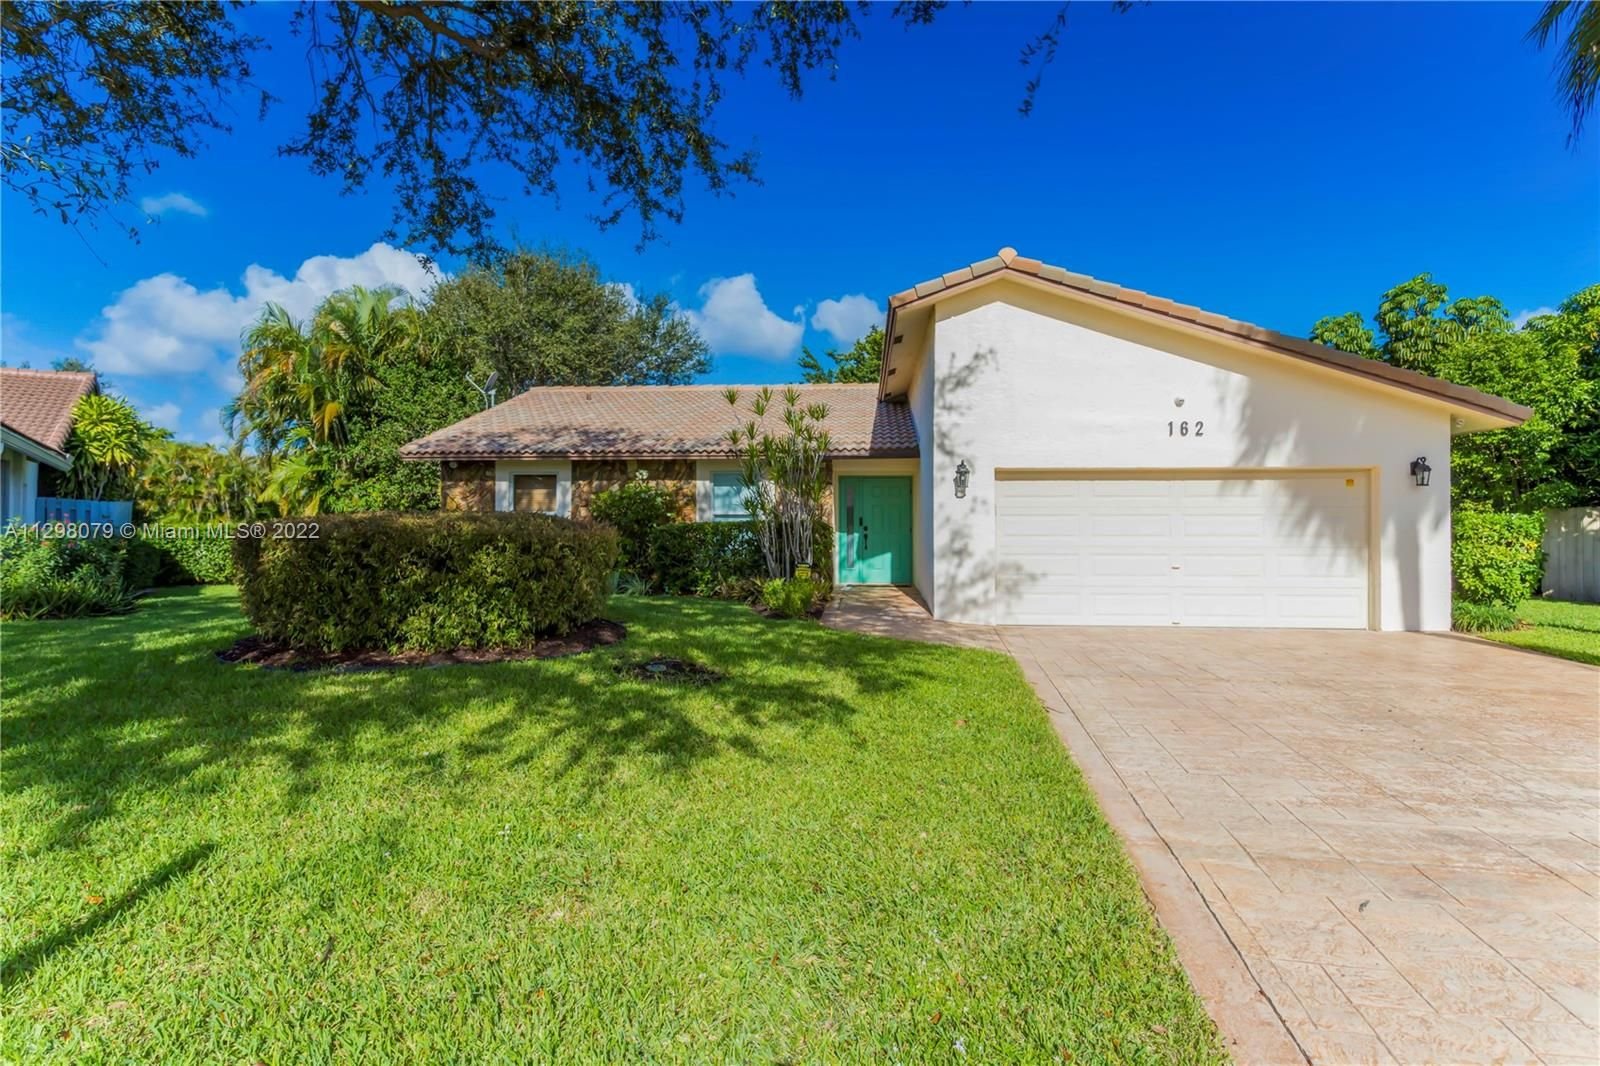 Real estate property located at 162 98th Ln, Broward County, Coral Springs, FL